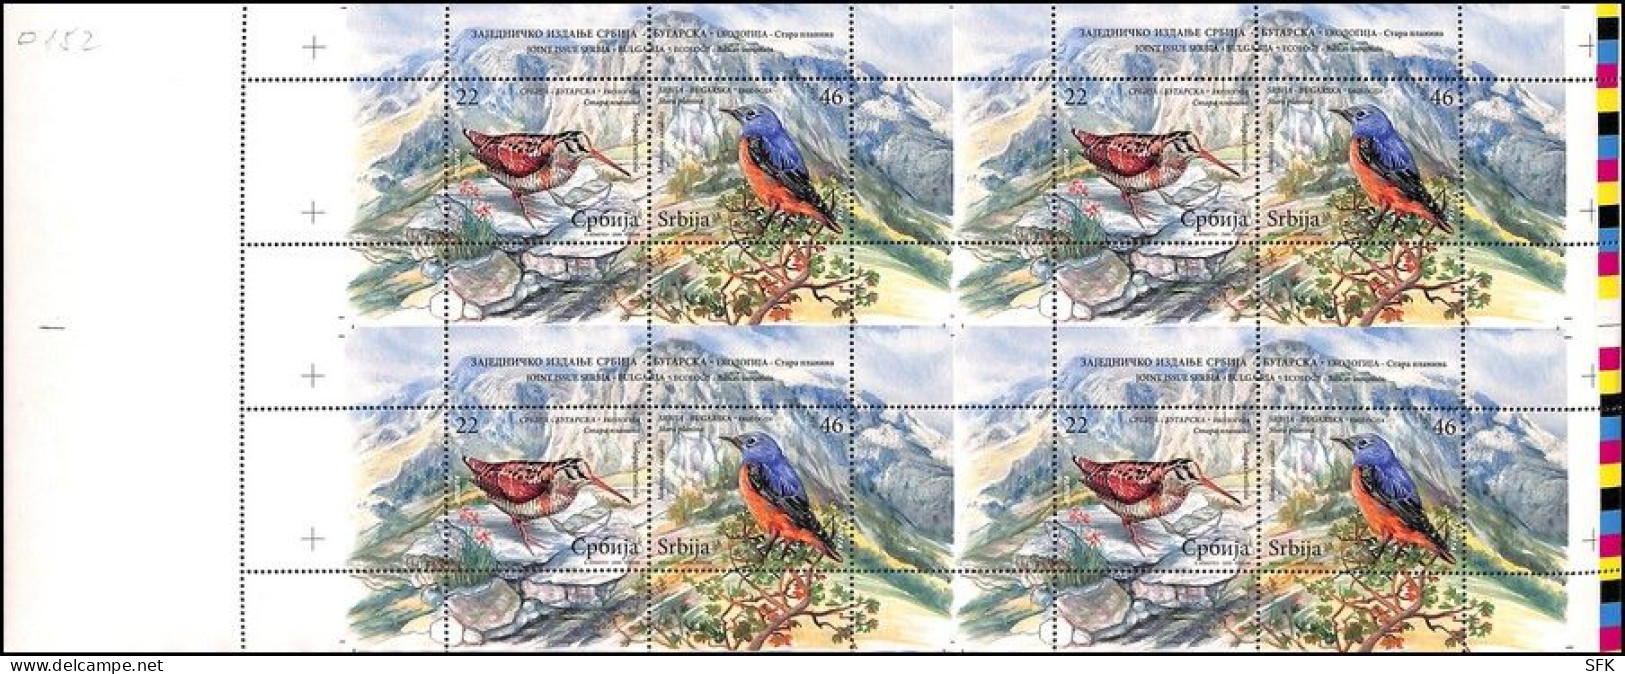 2009 Ecology "Stara Planina" (Ancient Mountain), Birds, Joint Serbian-Bulgarian Issue: Four Sheets In Se-tenant MNH - Imperforates, Proofs & Errors